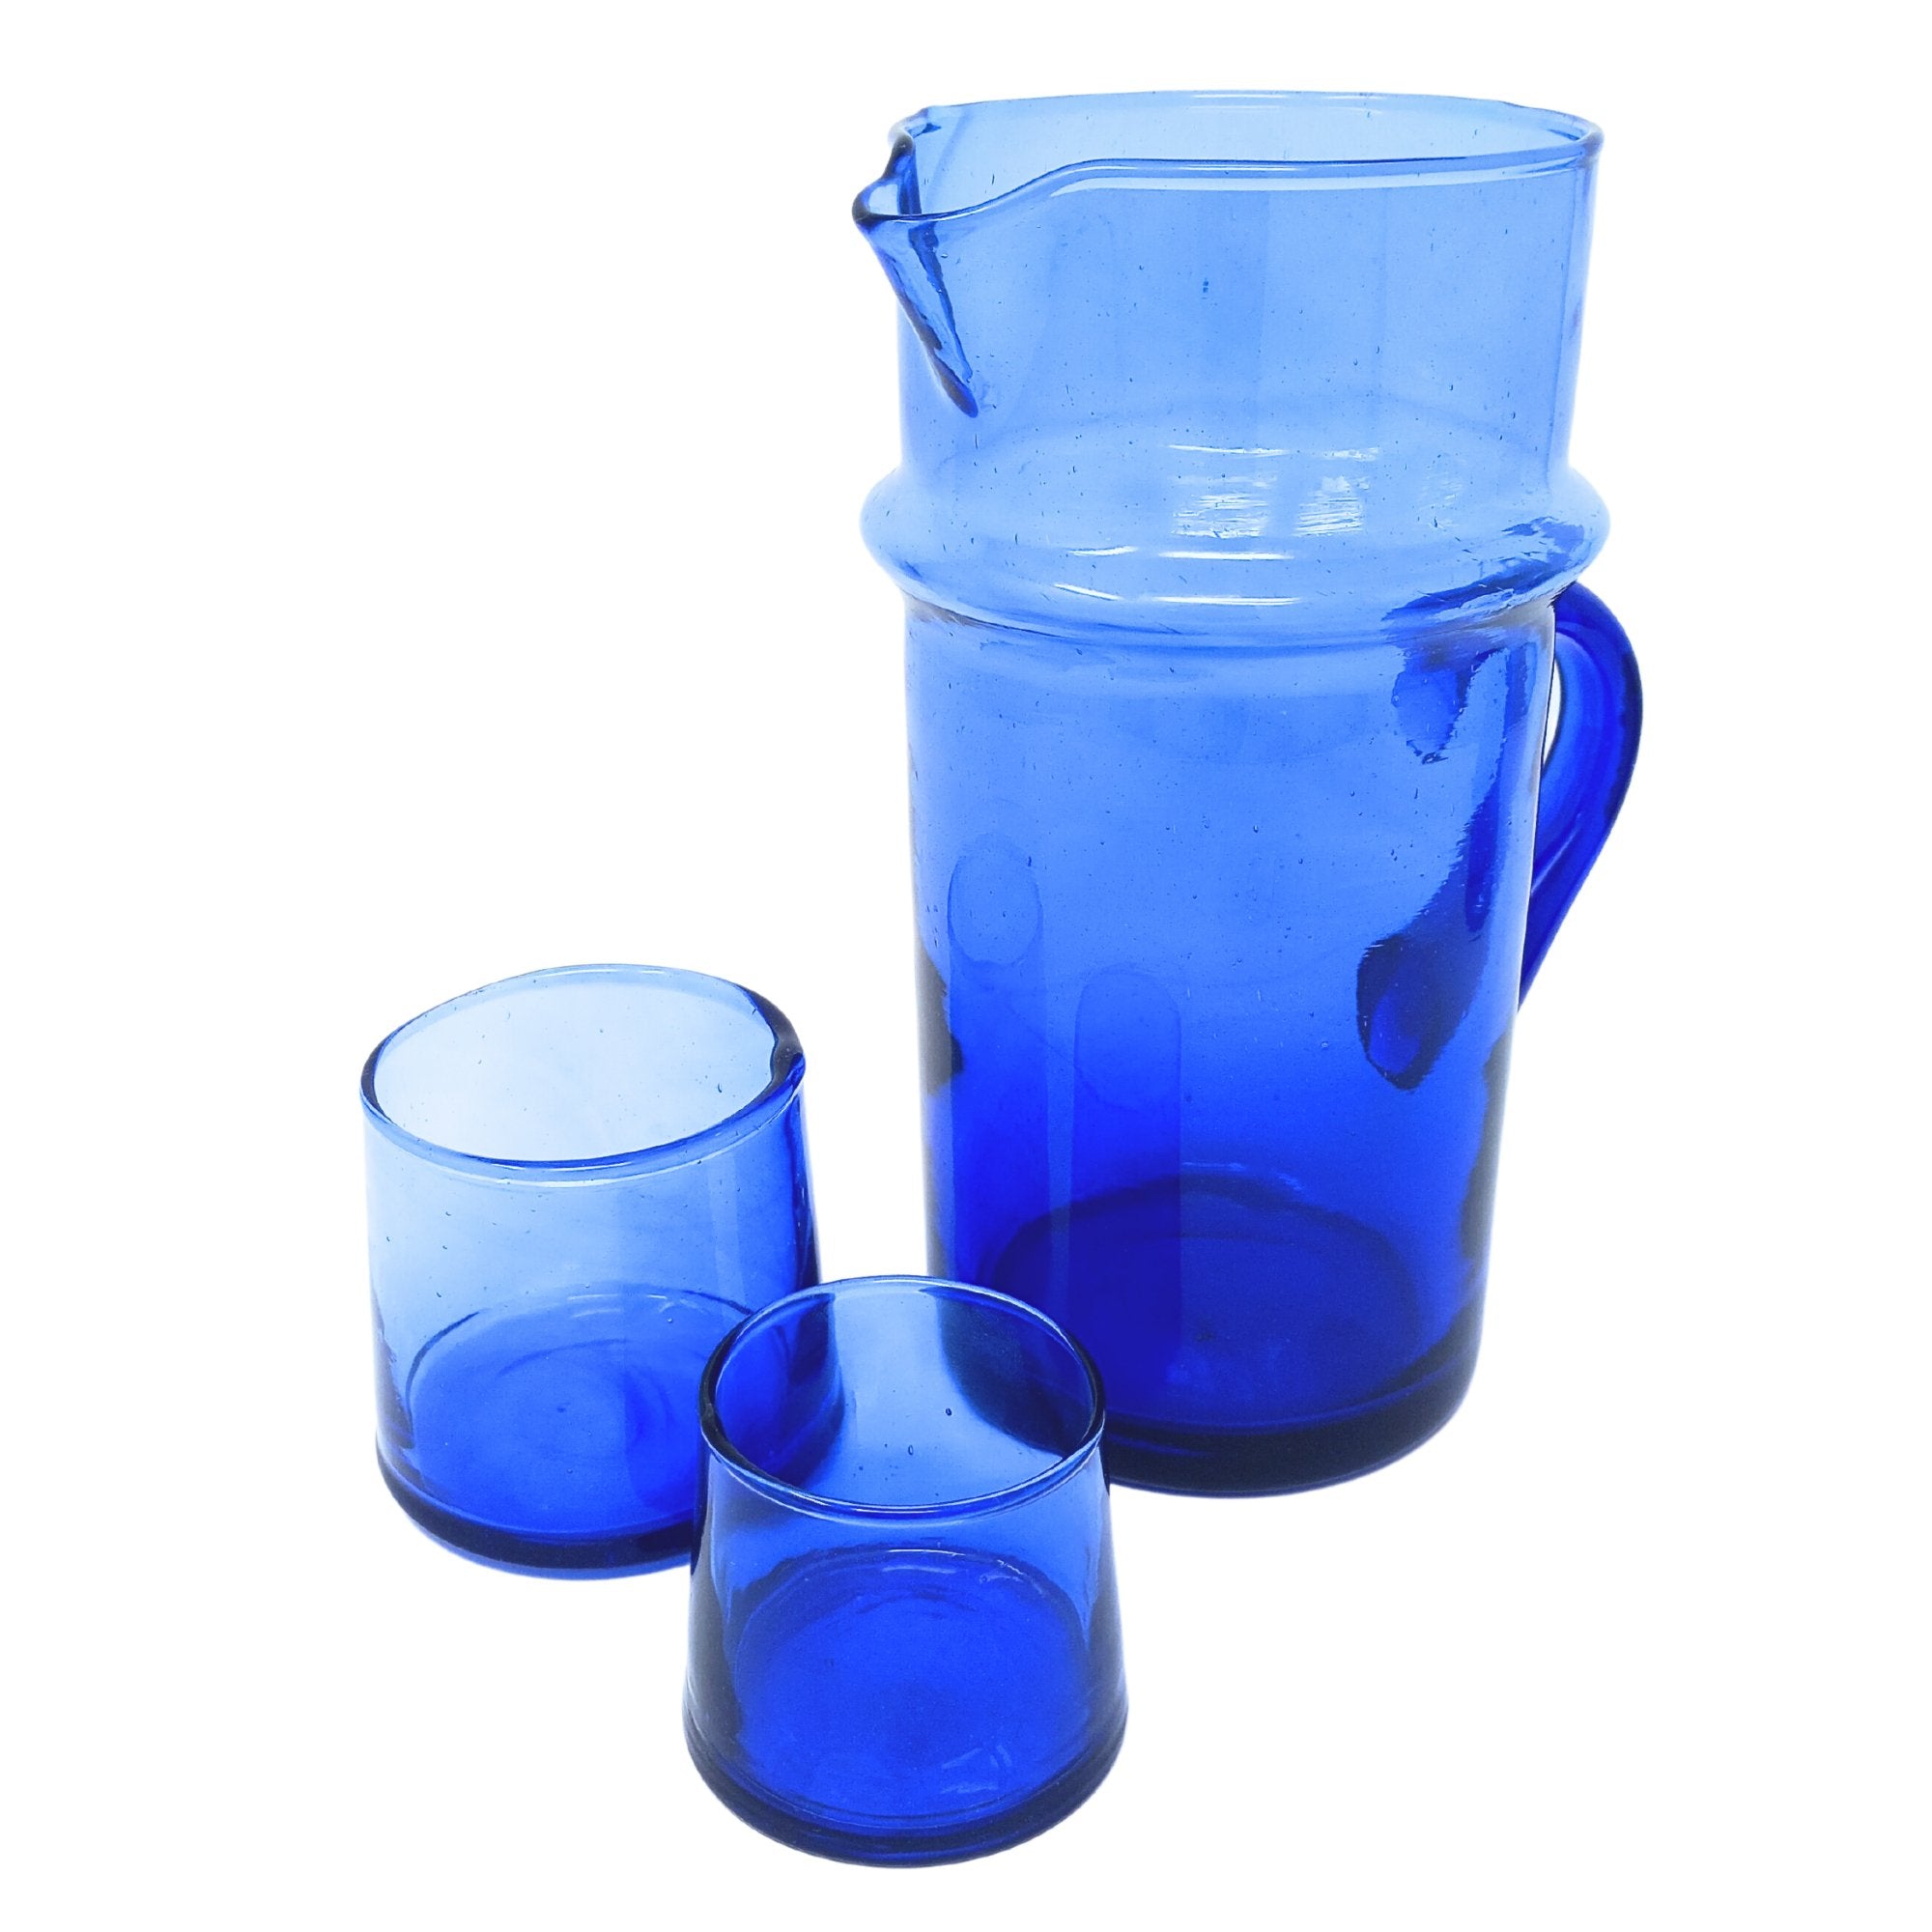 Inverted Recycled Drinking Glass Blue - Artisan Stories